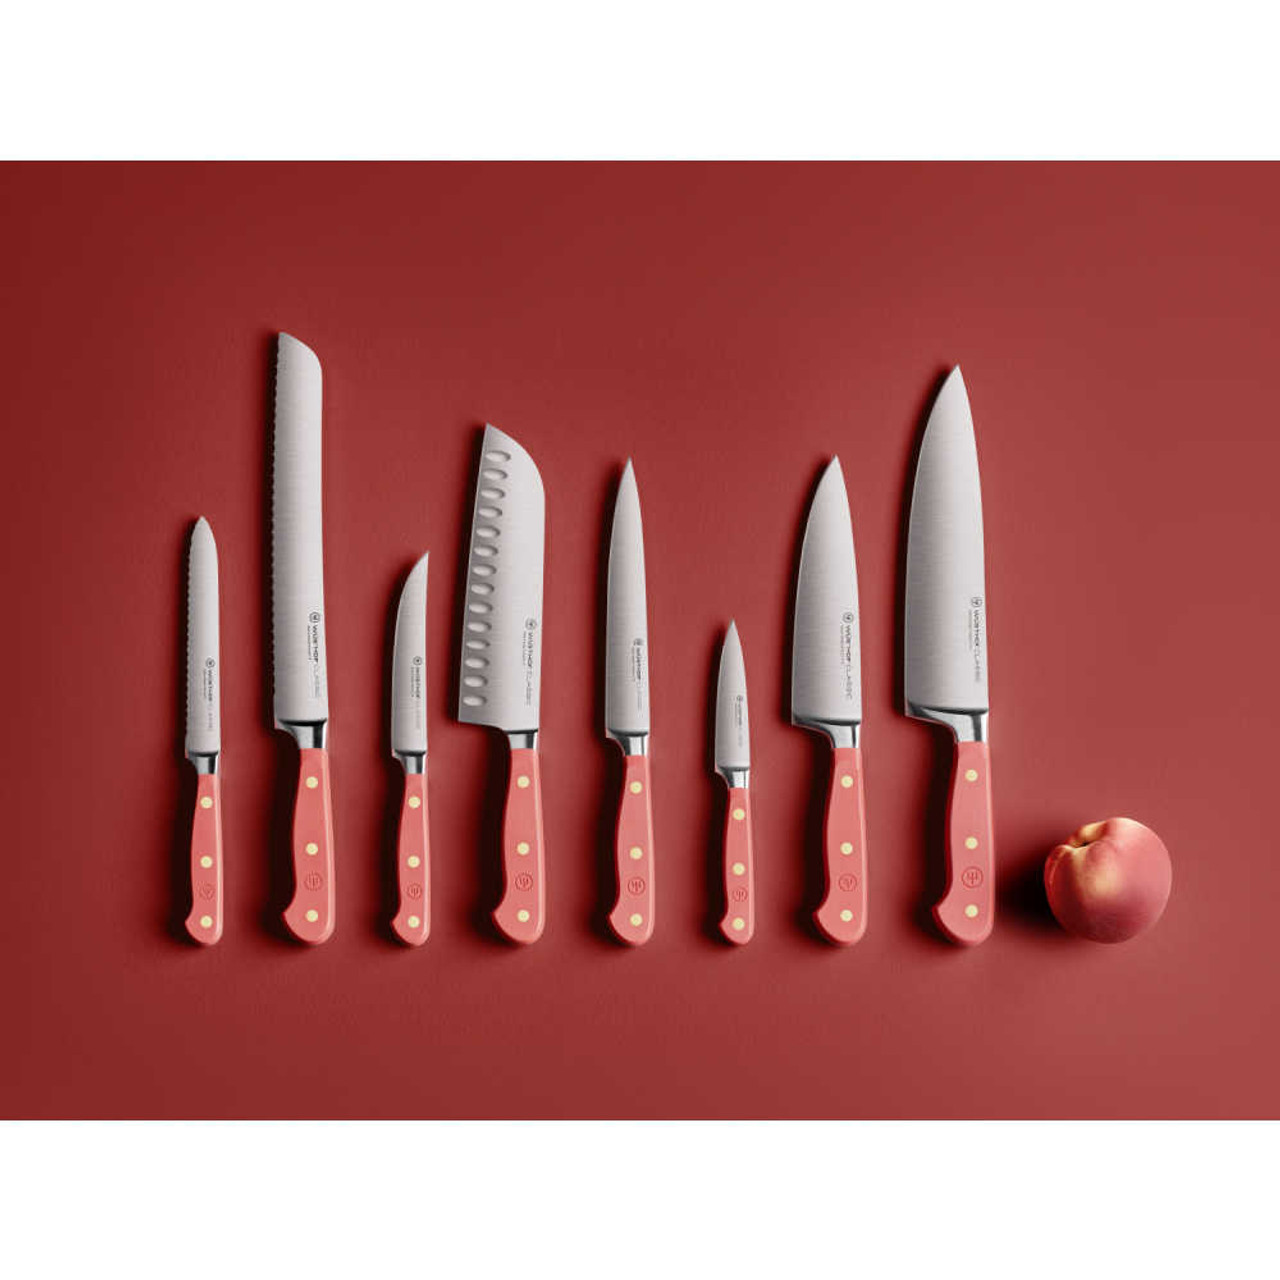 https://cdn11.bigcommerce.com/s-hccytny0od/images/stencil/1280x1280/products/5391/23453/Wusthof_Classic_Color_8-Piece_Knife_Block_Set_Coral_Peach_3__24462.1682091915.jpg?c=2?imbypass=on